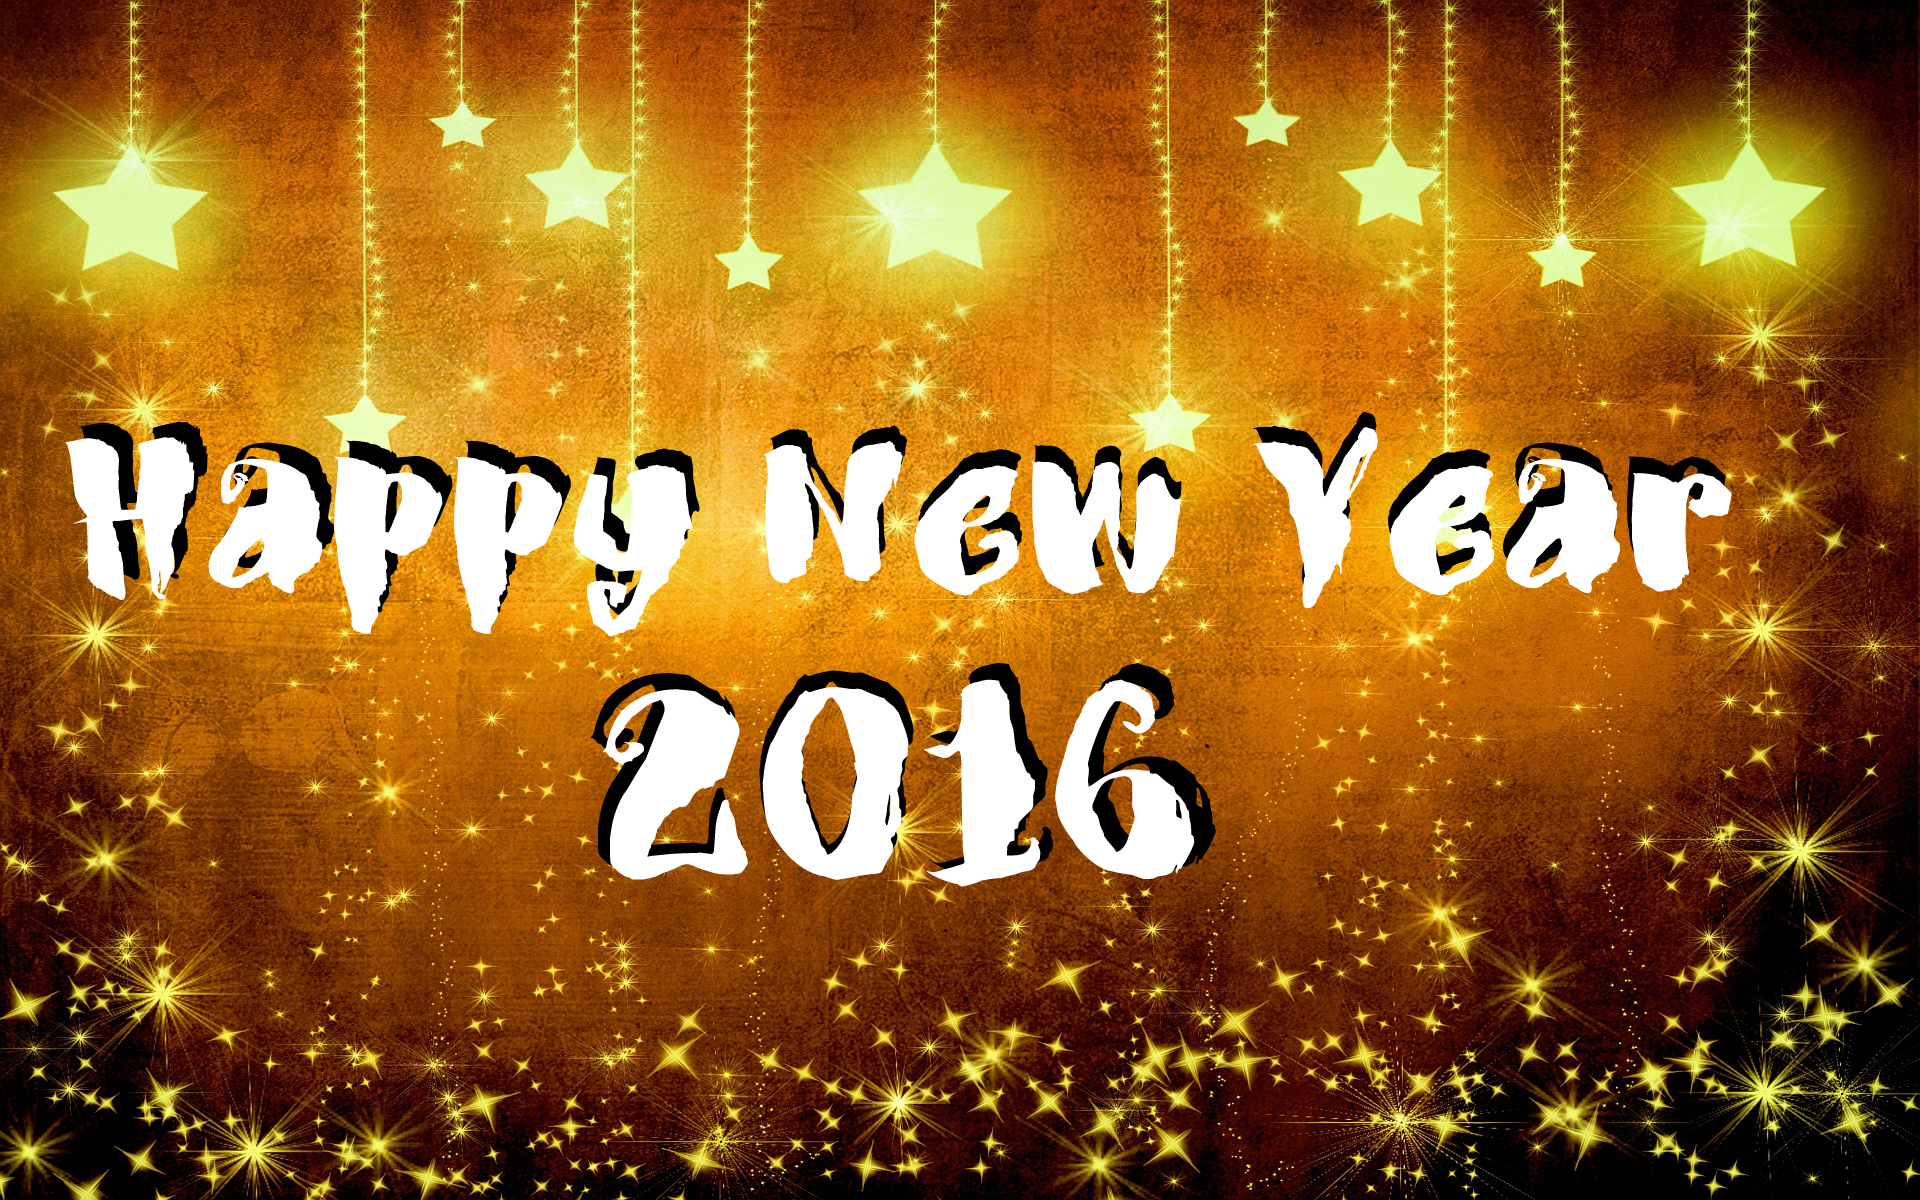 Happy New Year 2016 Wallpapers Pictures Images 1920x1200